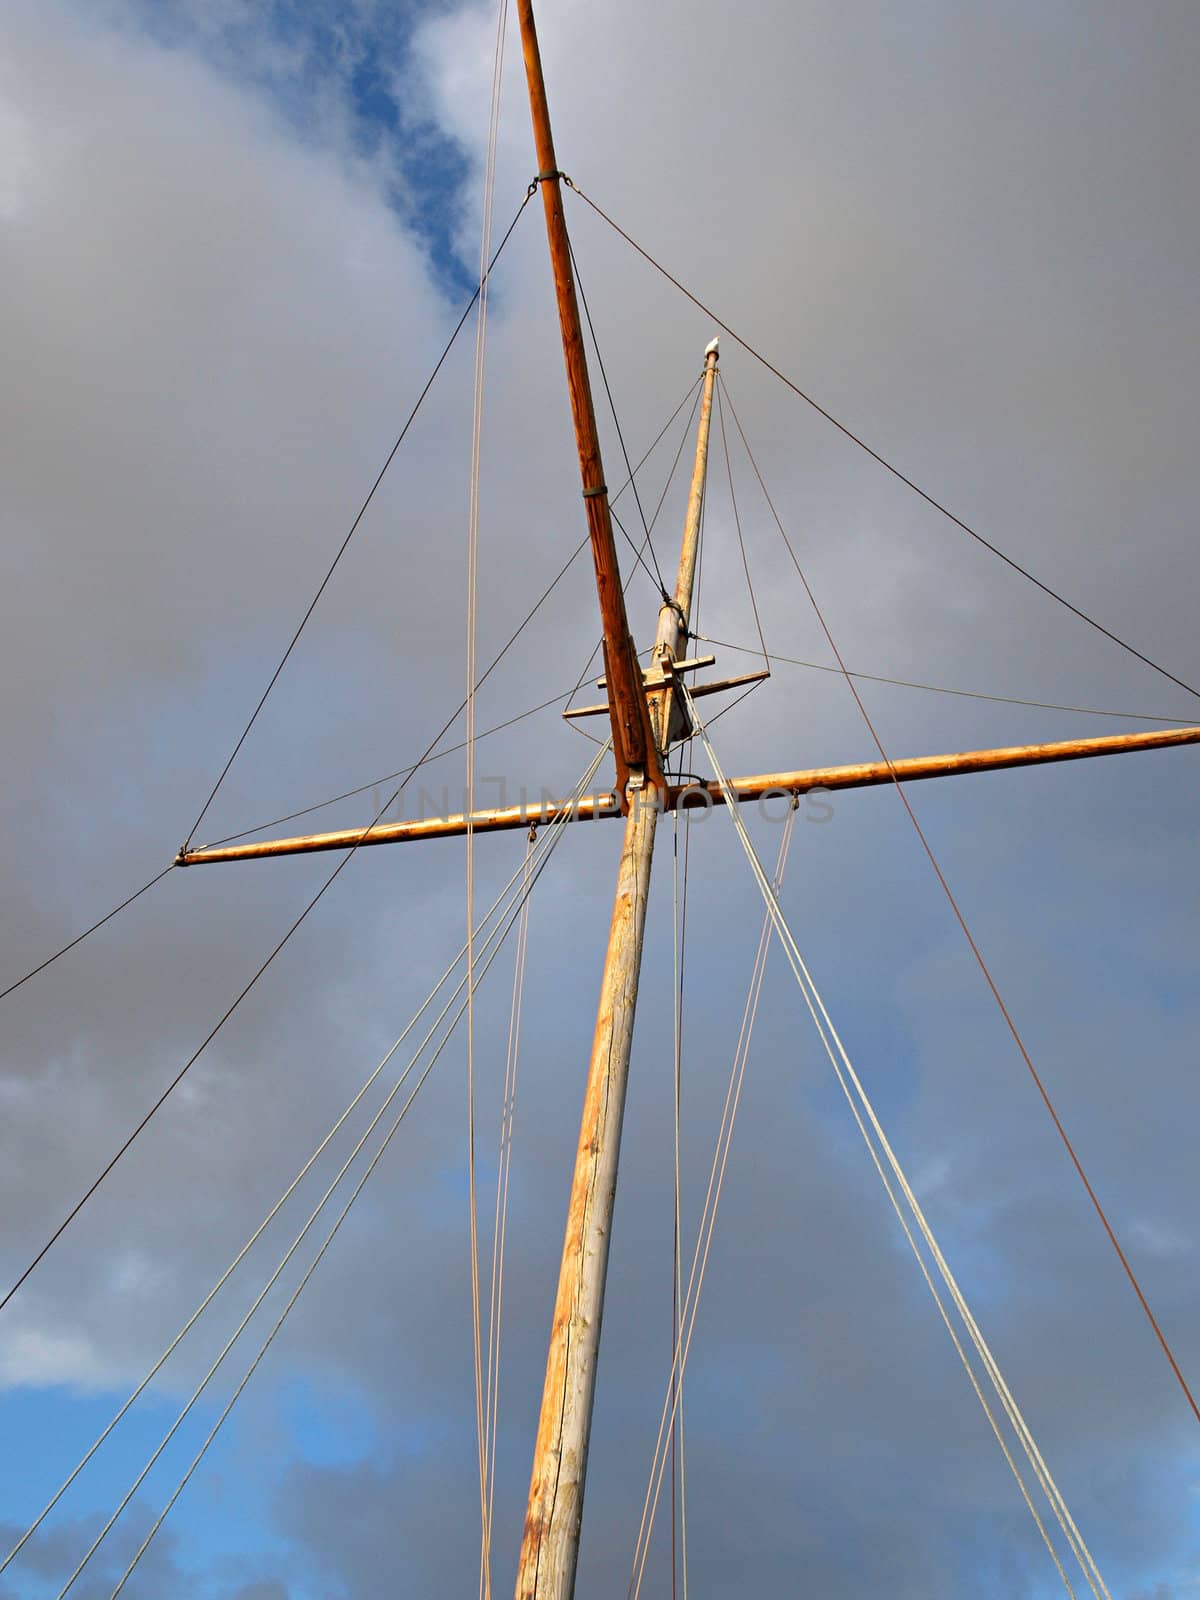 Wooden mast of an old sail boat with cloudy background  